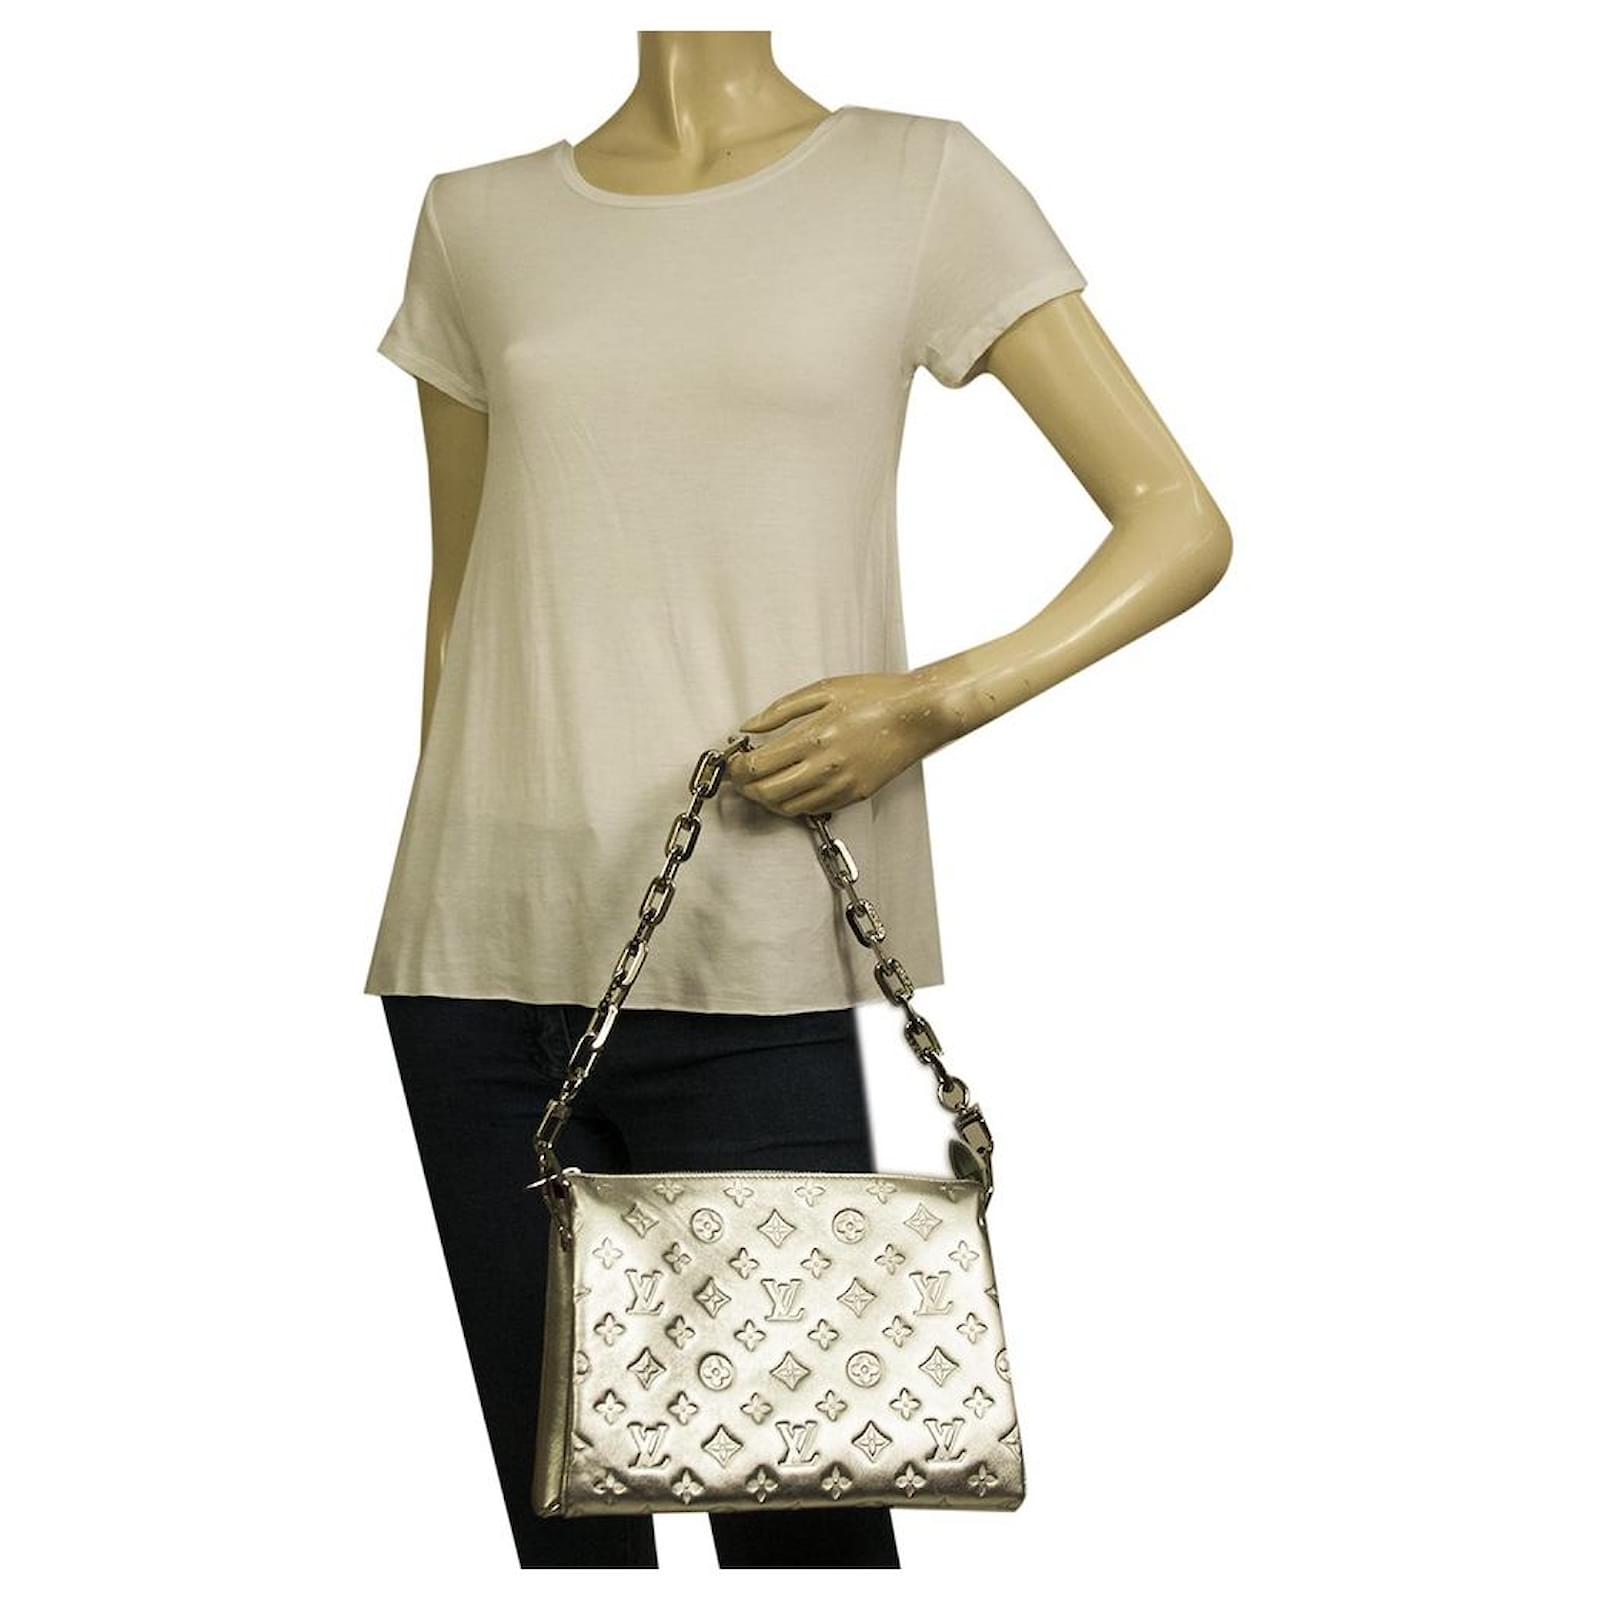 Louis Vuitton pre-owned Monogram Embossed Puffy Coussin PM two-way Handbag  - Farfetch